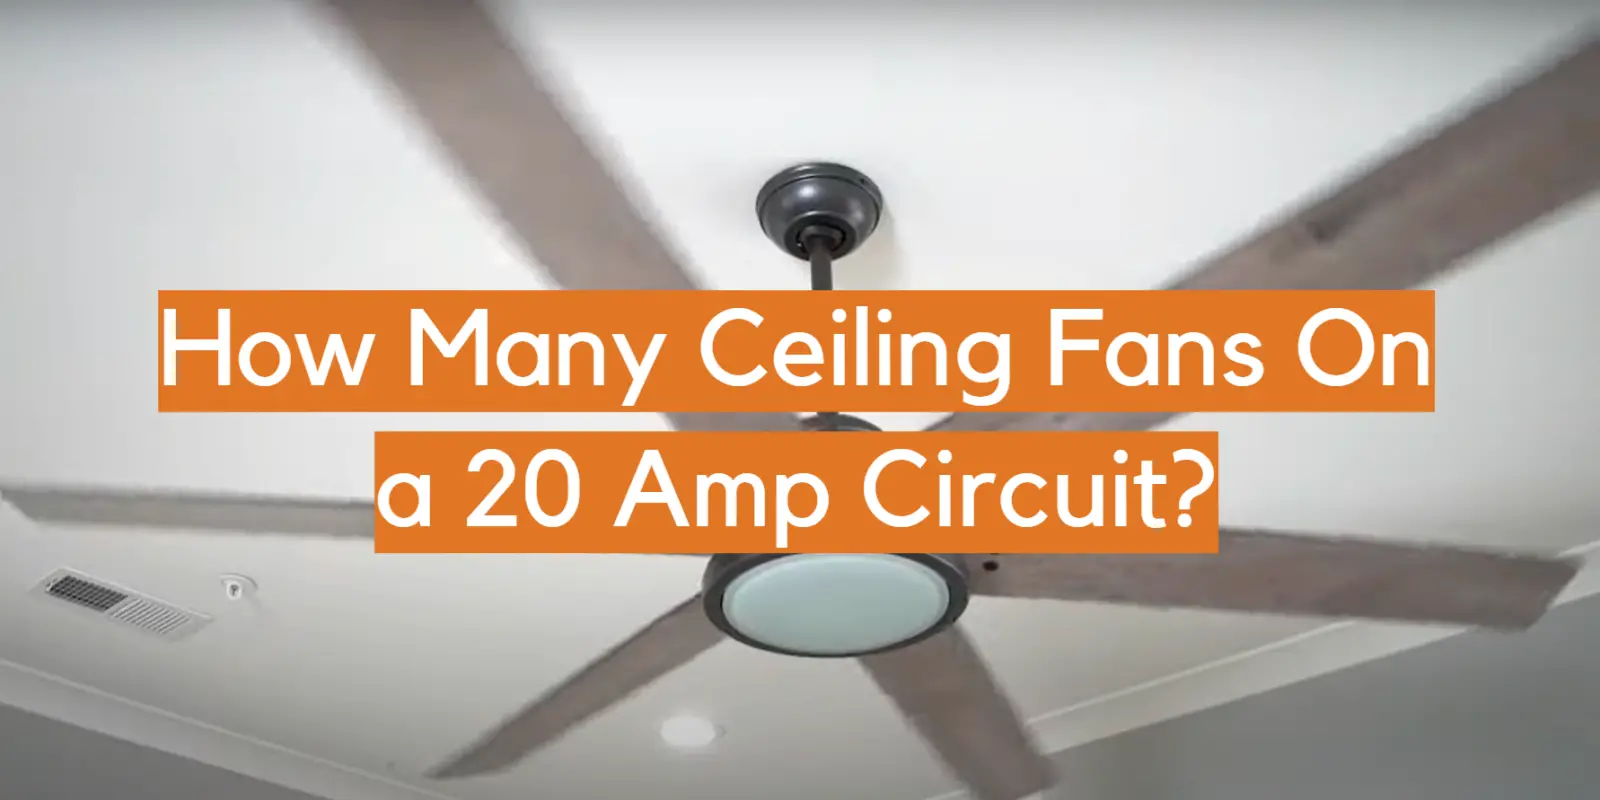 How Many Ceiling Fans On a 20 Amp Circuit?